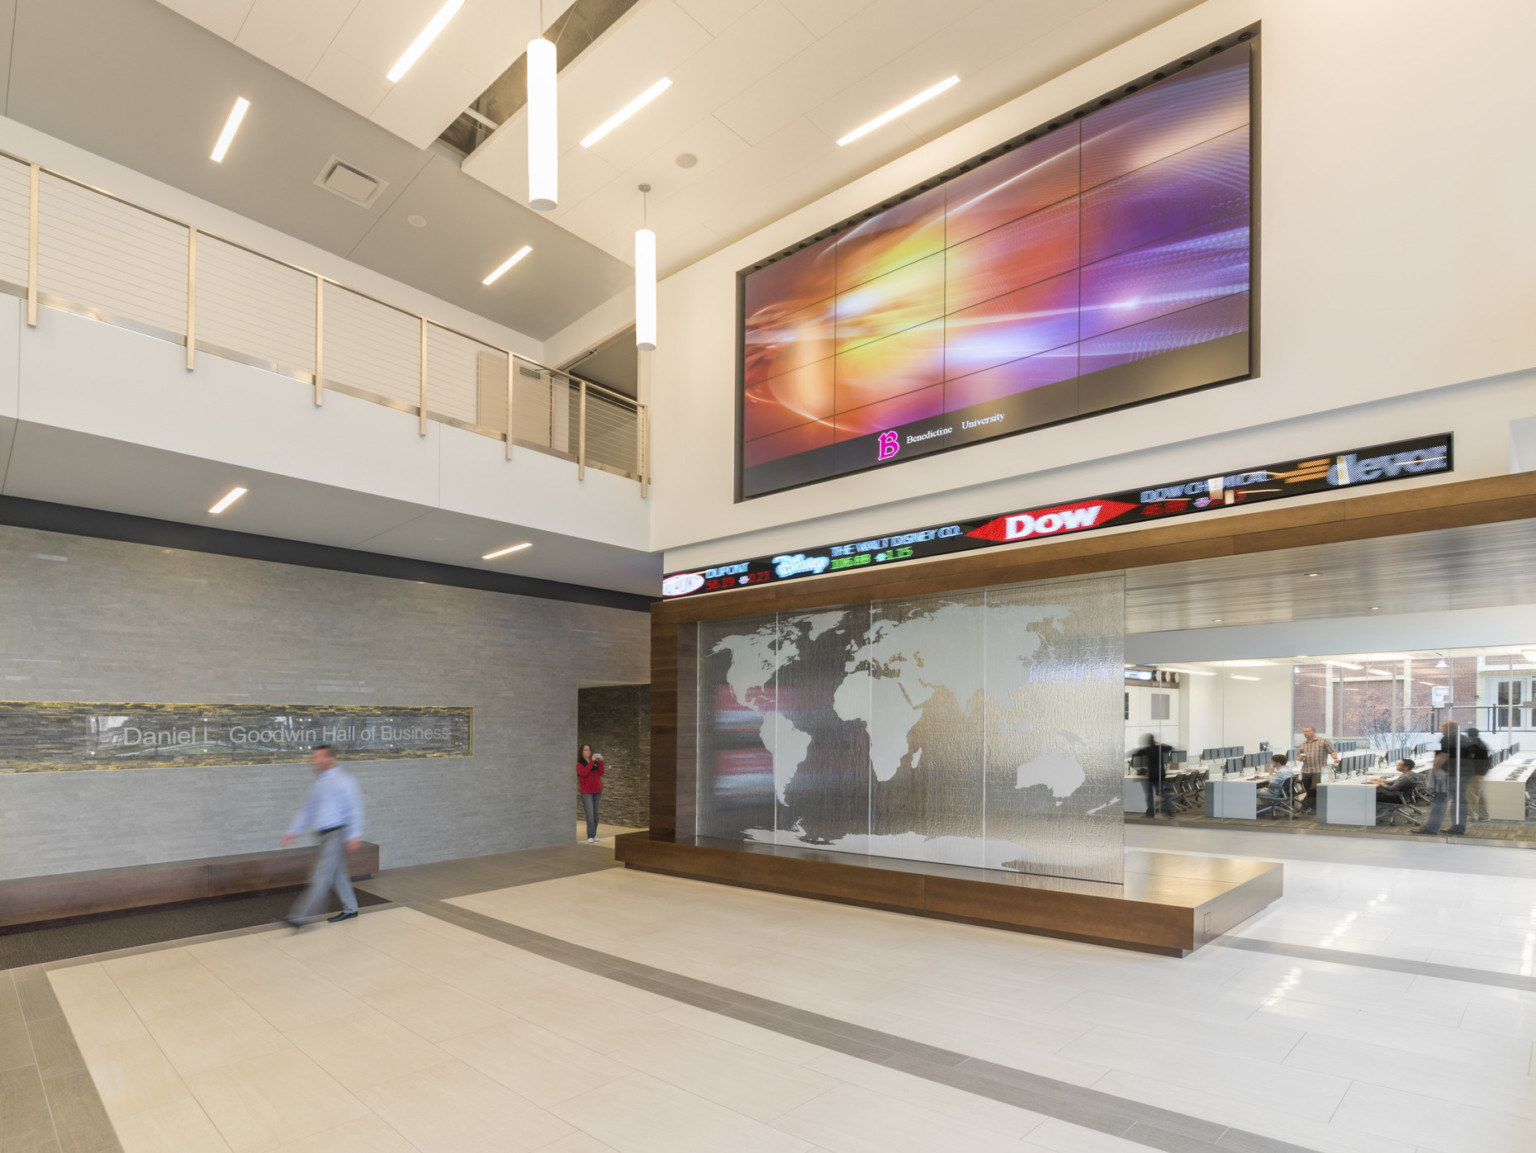 Interior multistory lobby with large screens over stock ticker, glass overlaid with world map. Balcony to left, pendant lights